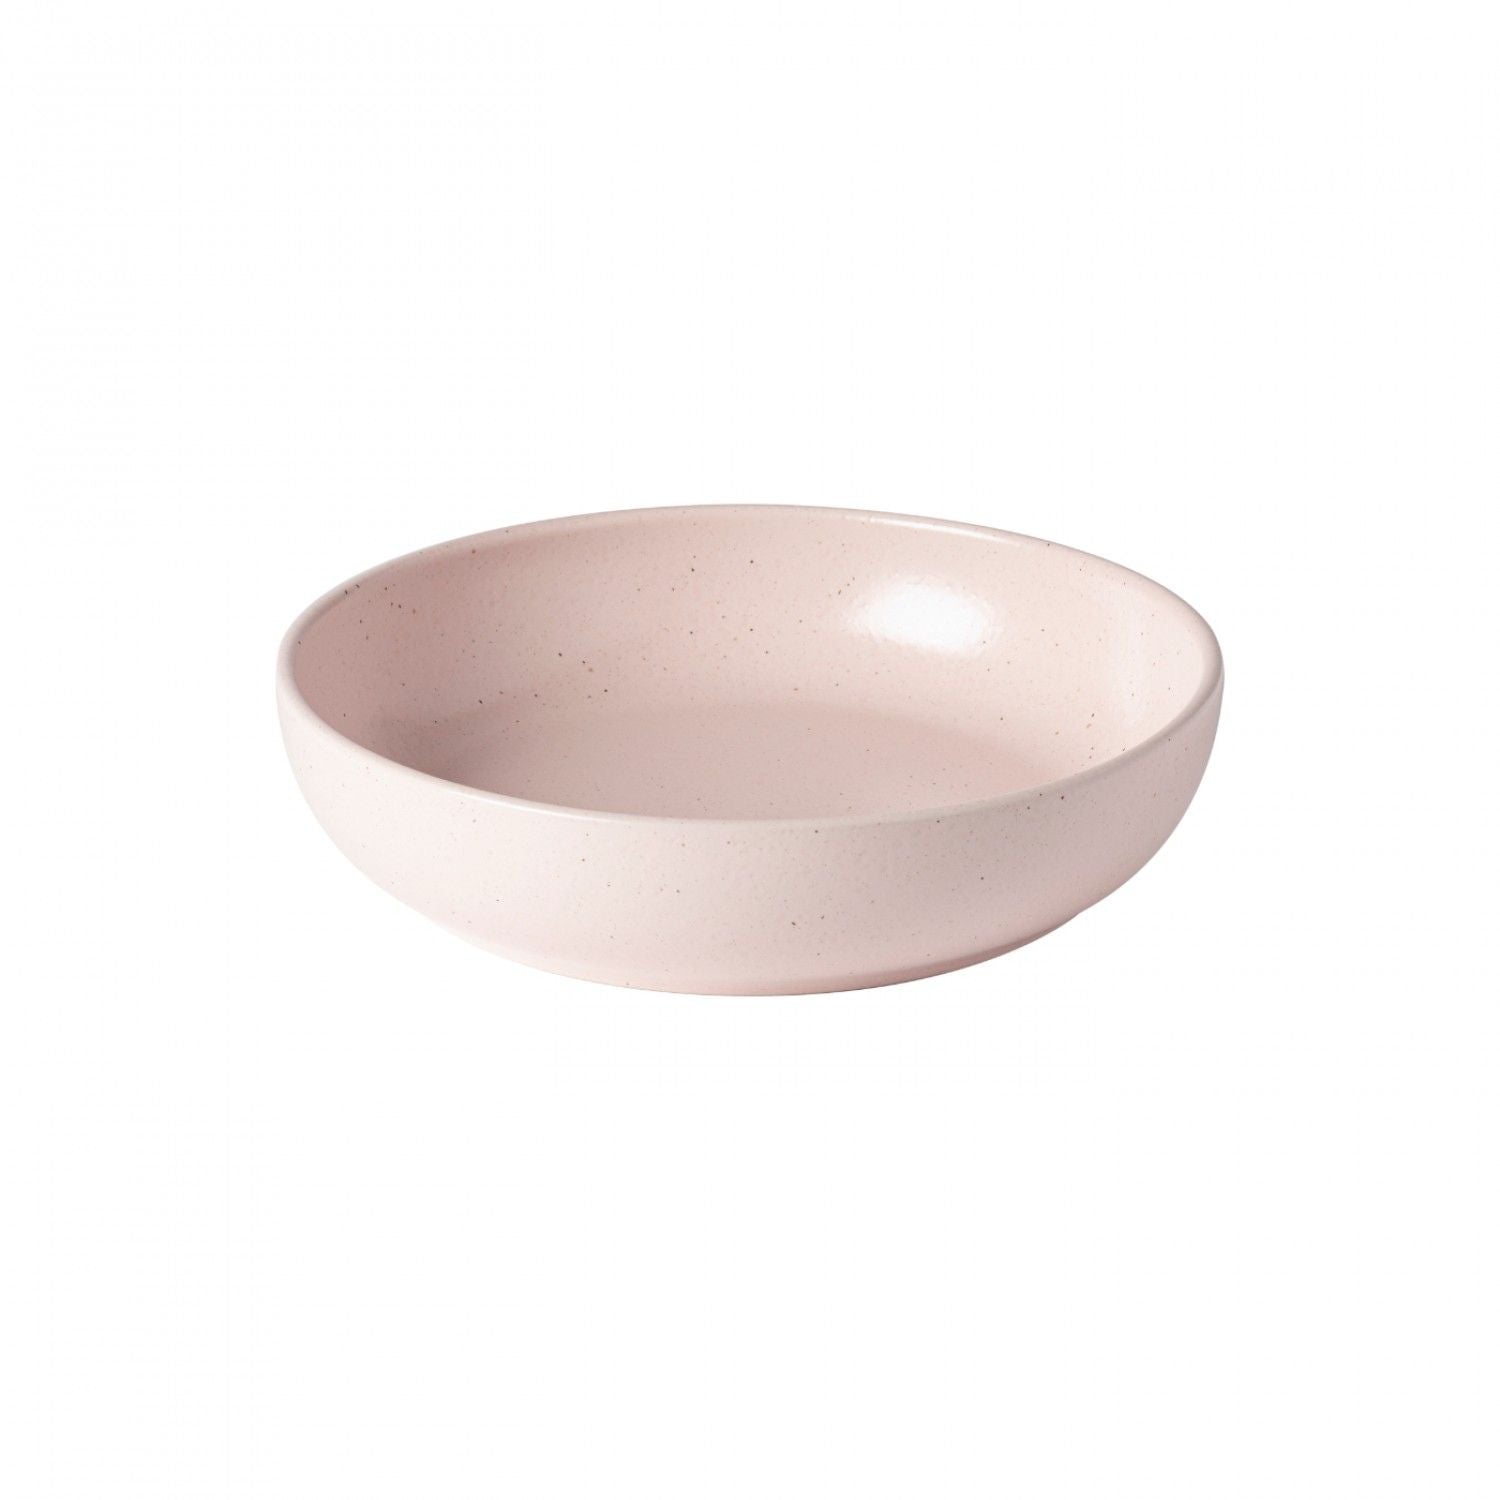 A pink Pacifica Marshmallow Dinnerware bowl from Casafina Living collection with a matte finish, placed on a white background.